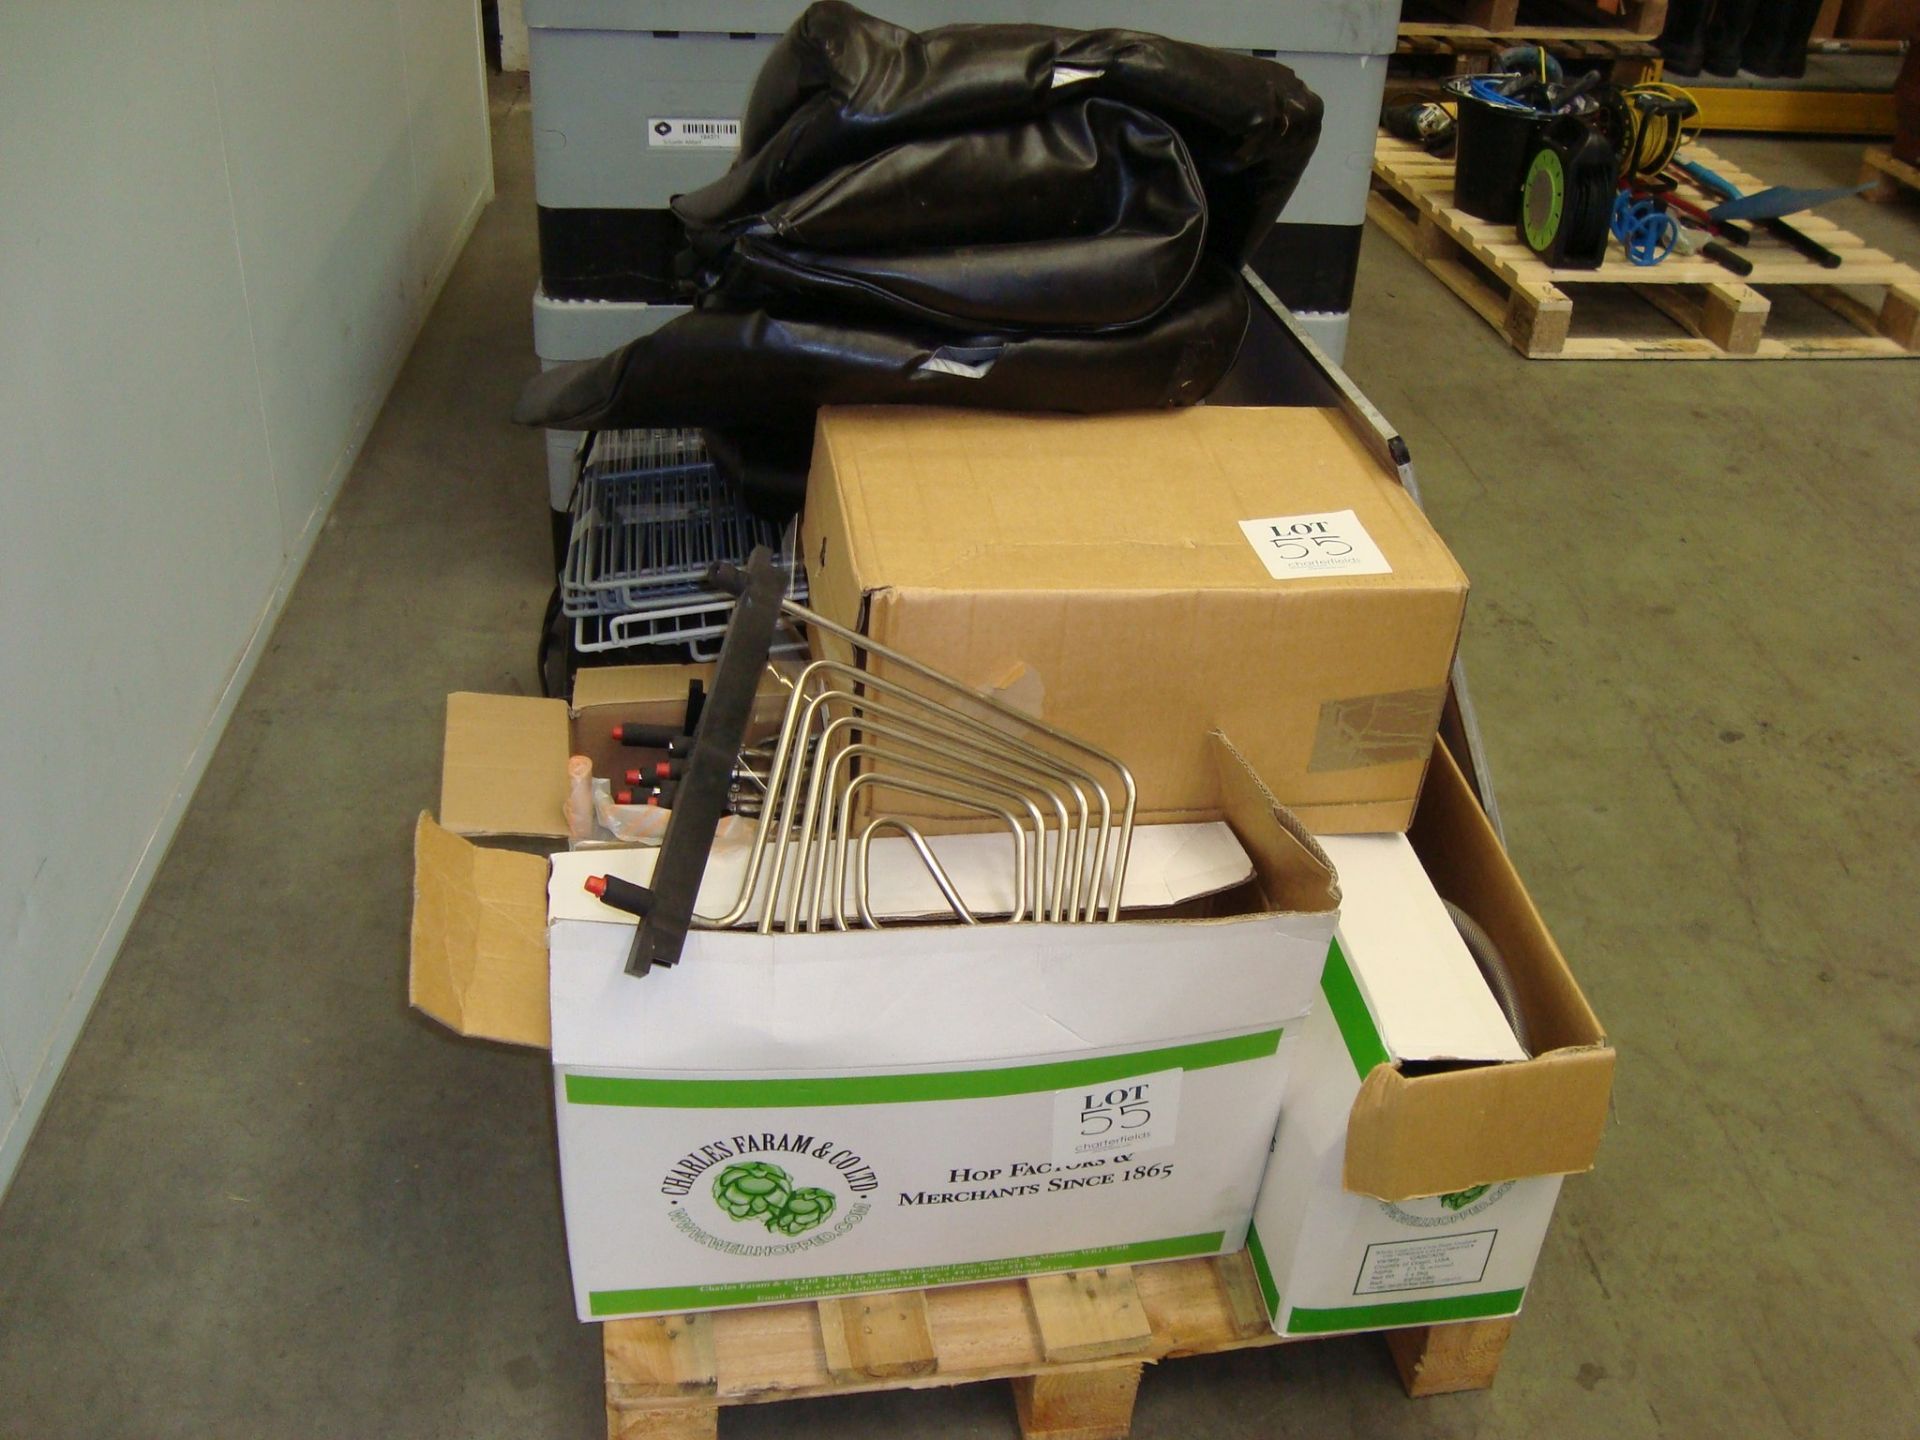 A pallet of various portable event beer chilling and dispensing equipment